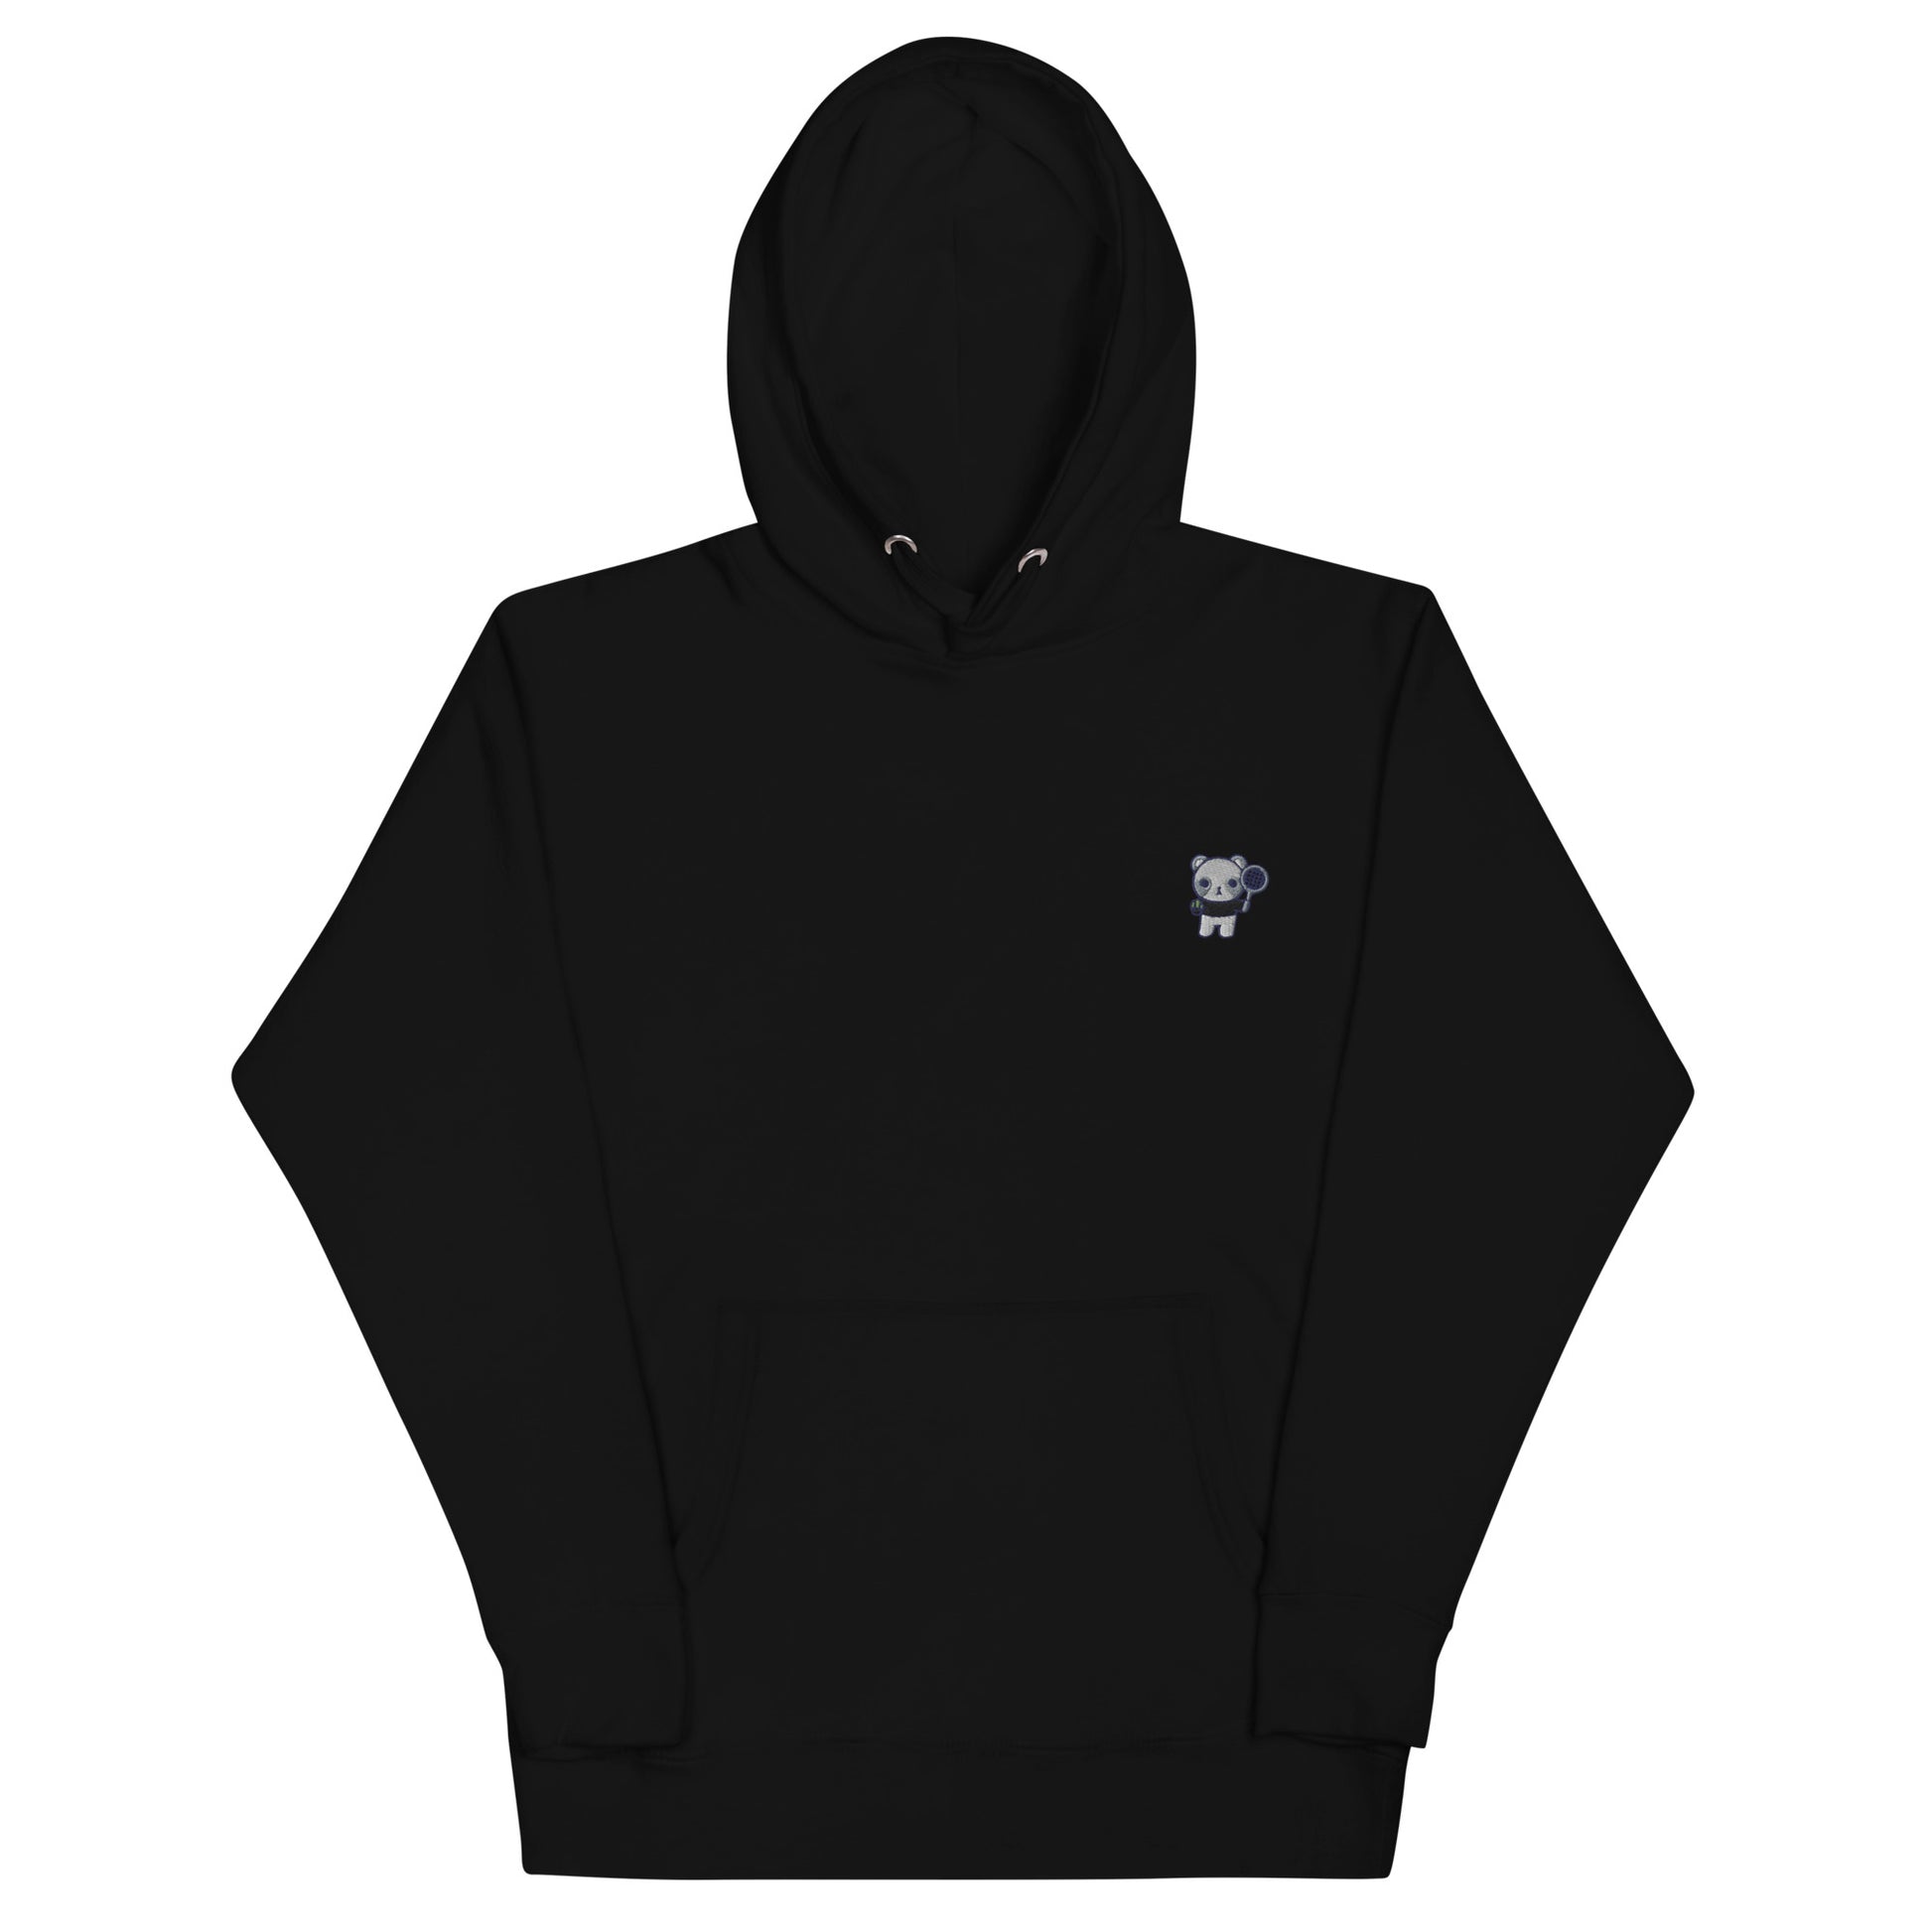 ADULT UNISEX HENRI HOODIE - EMBROIDERED LOGO - AVAILABLE IN 10 COLORS - TOKKITENNIS